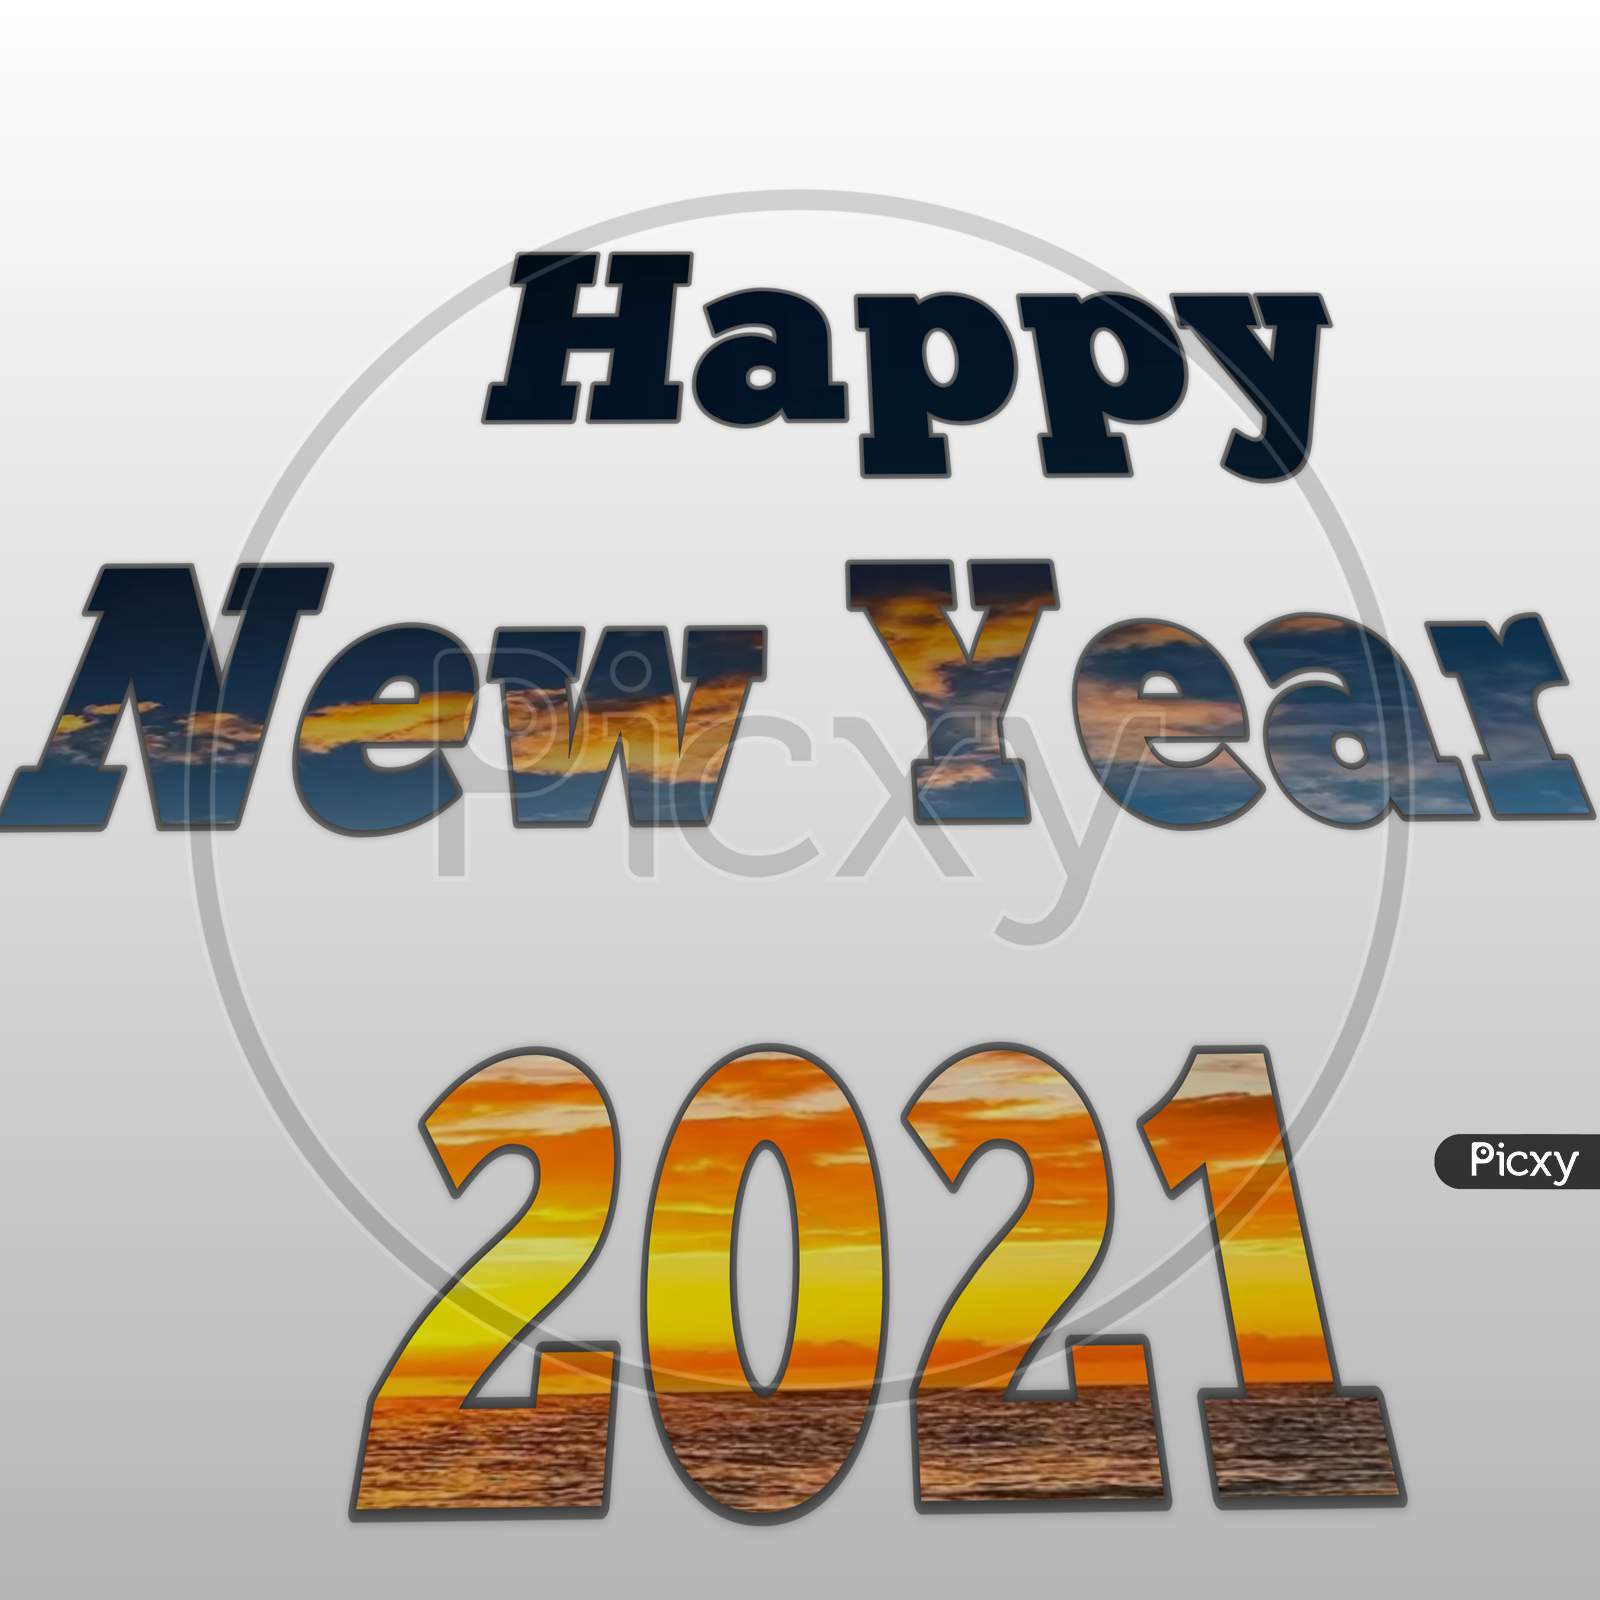 Happy new year 2021 banner illustration. Happy New Year rendering.